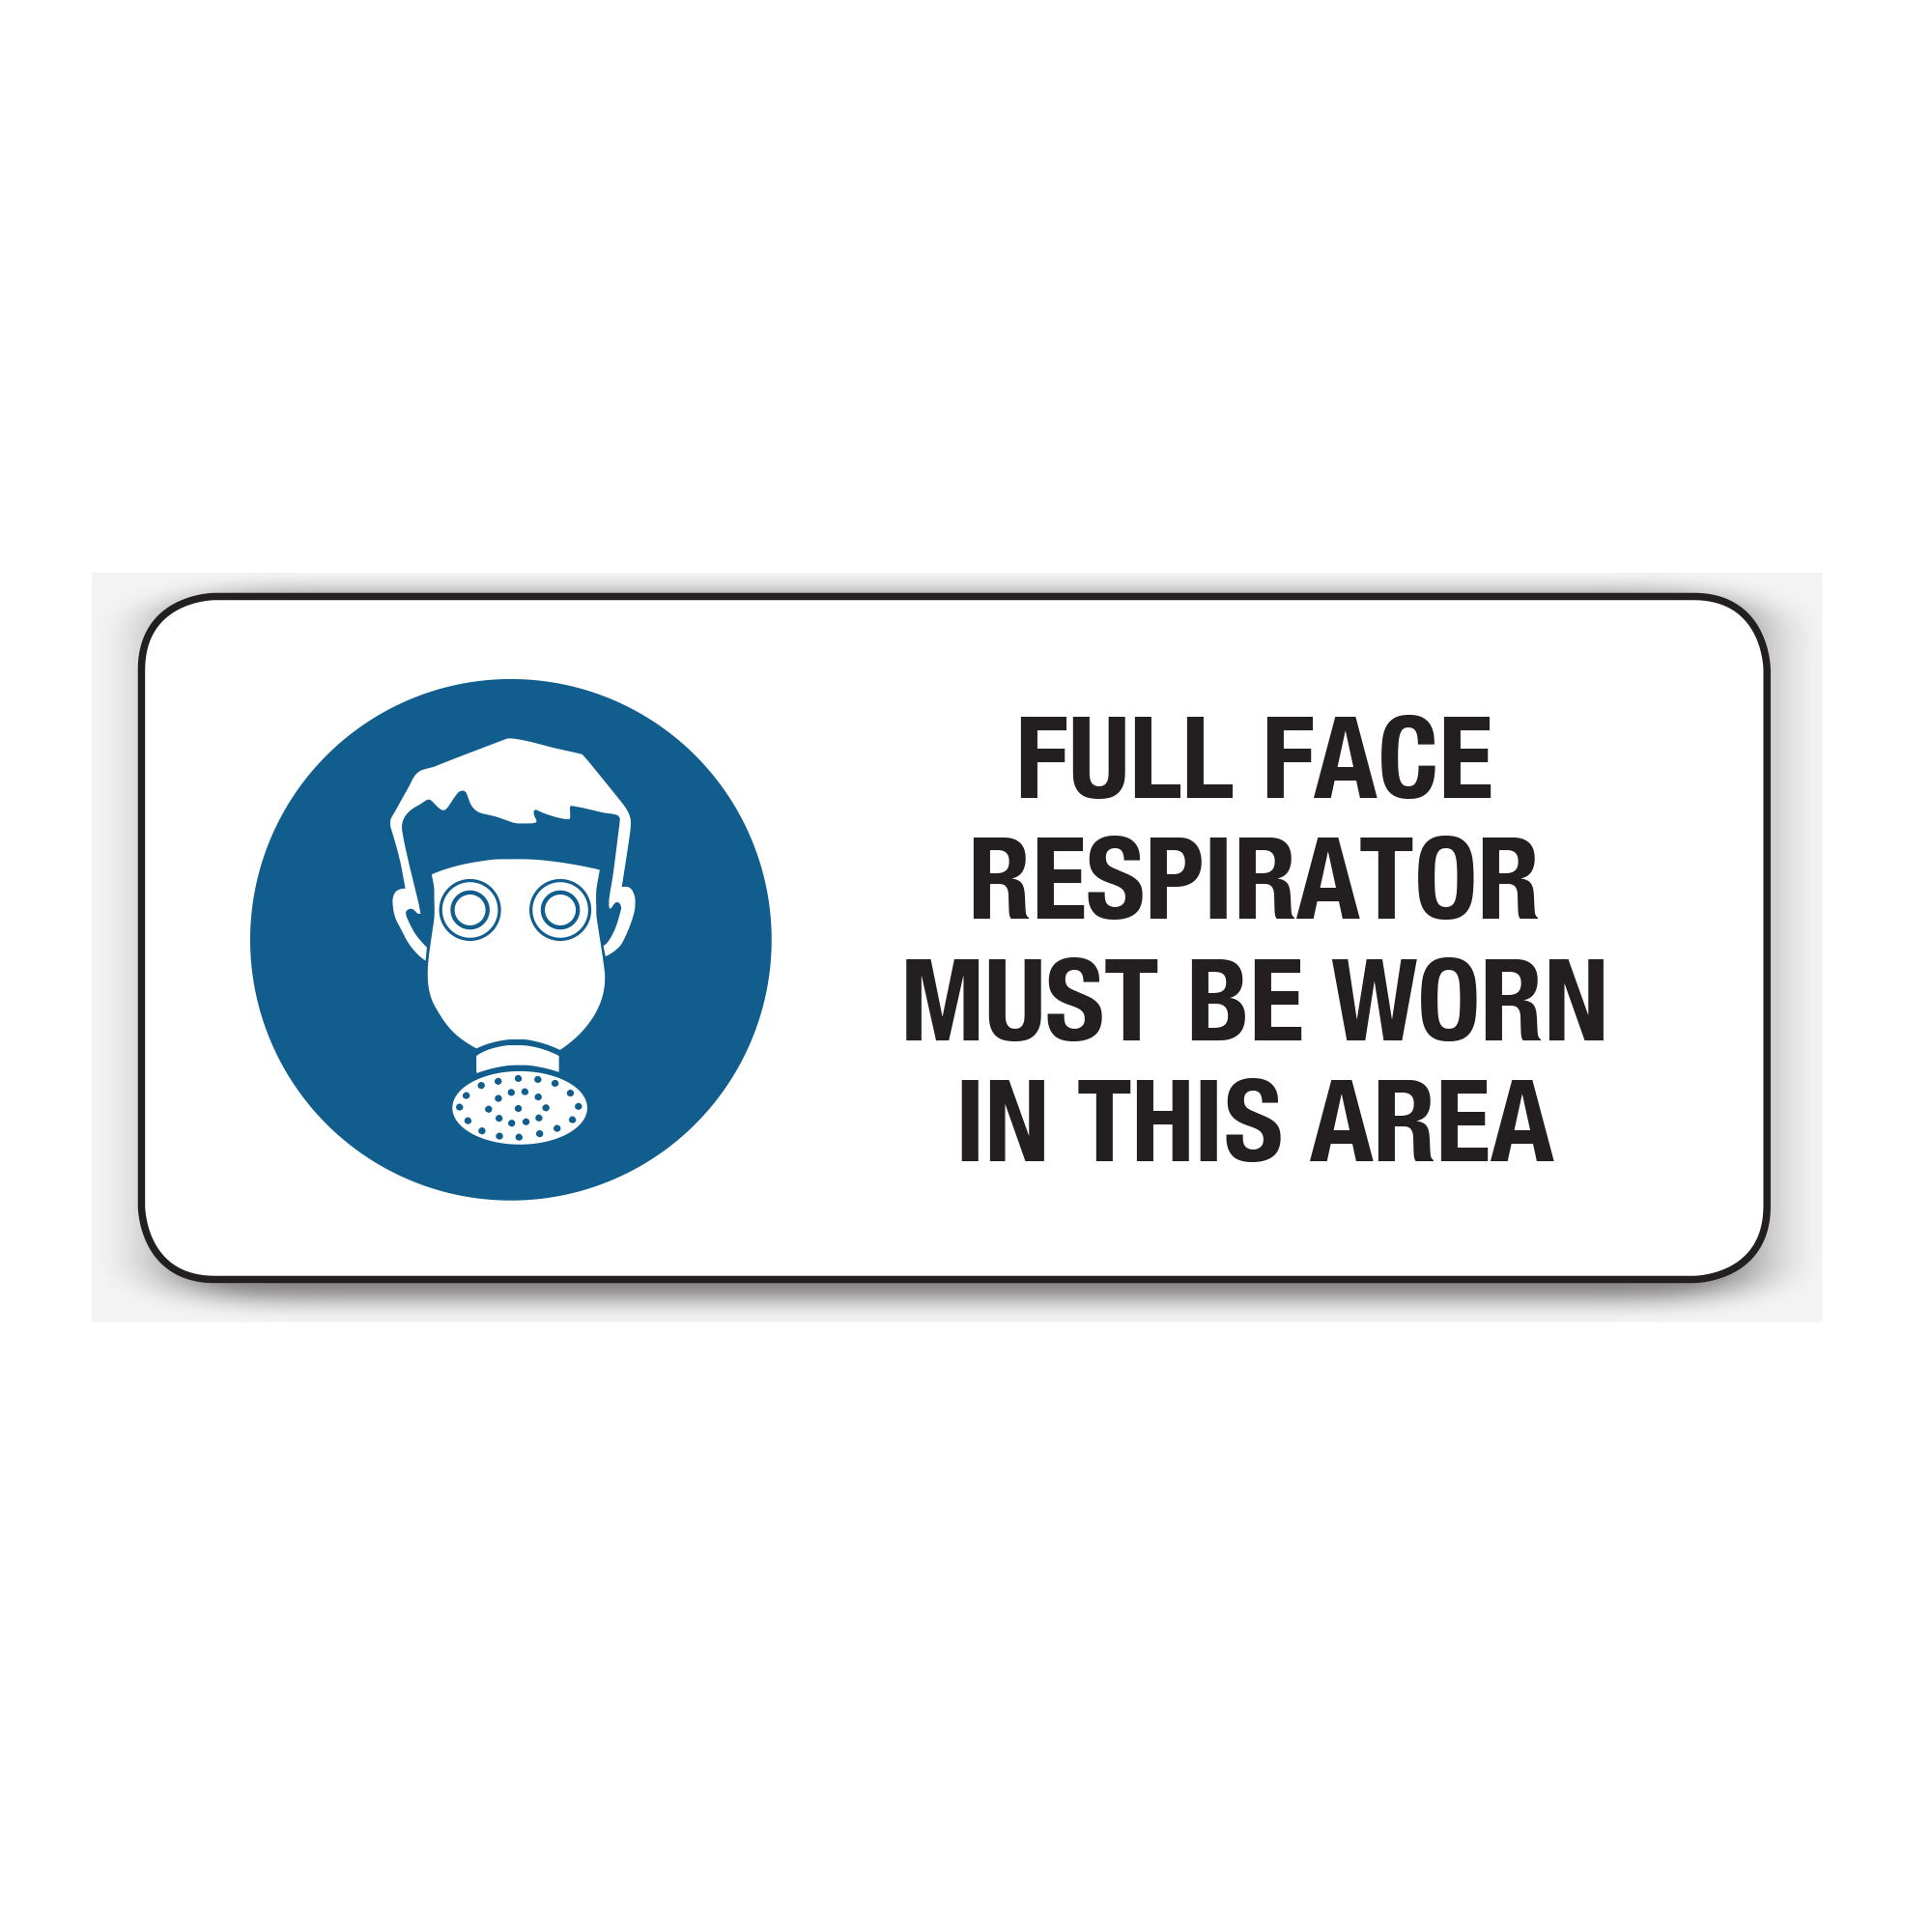 Protective Clothing Must Be Worn In This Area Signs